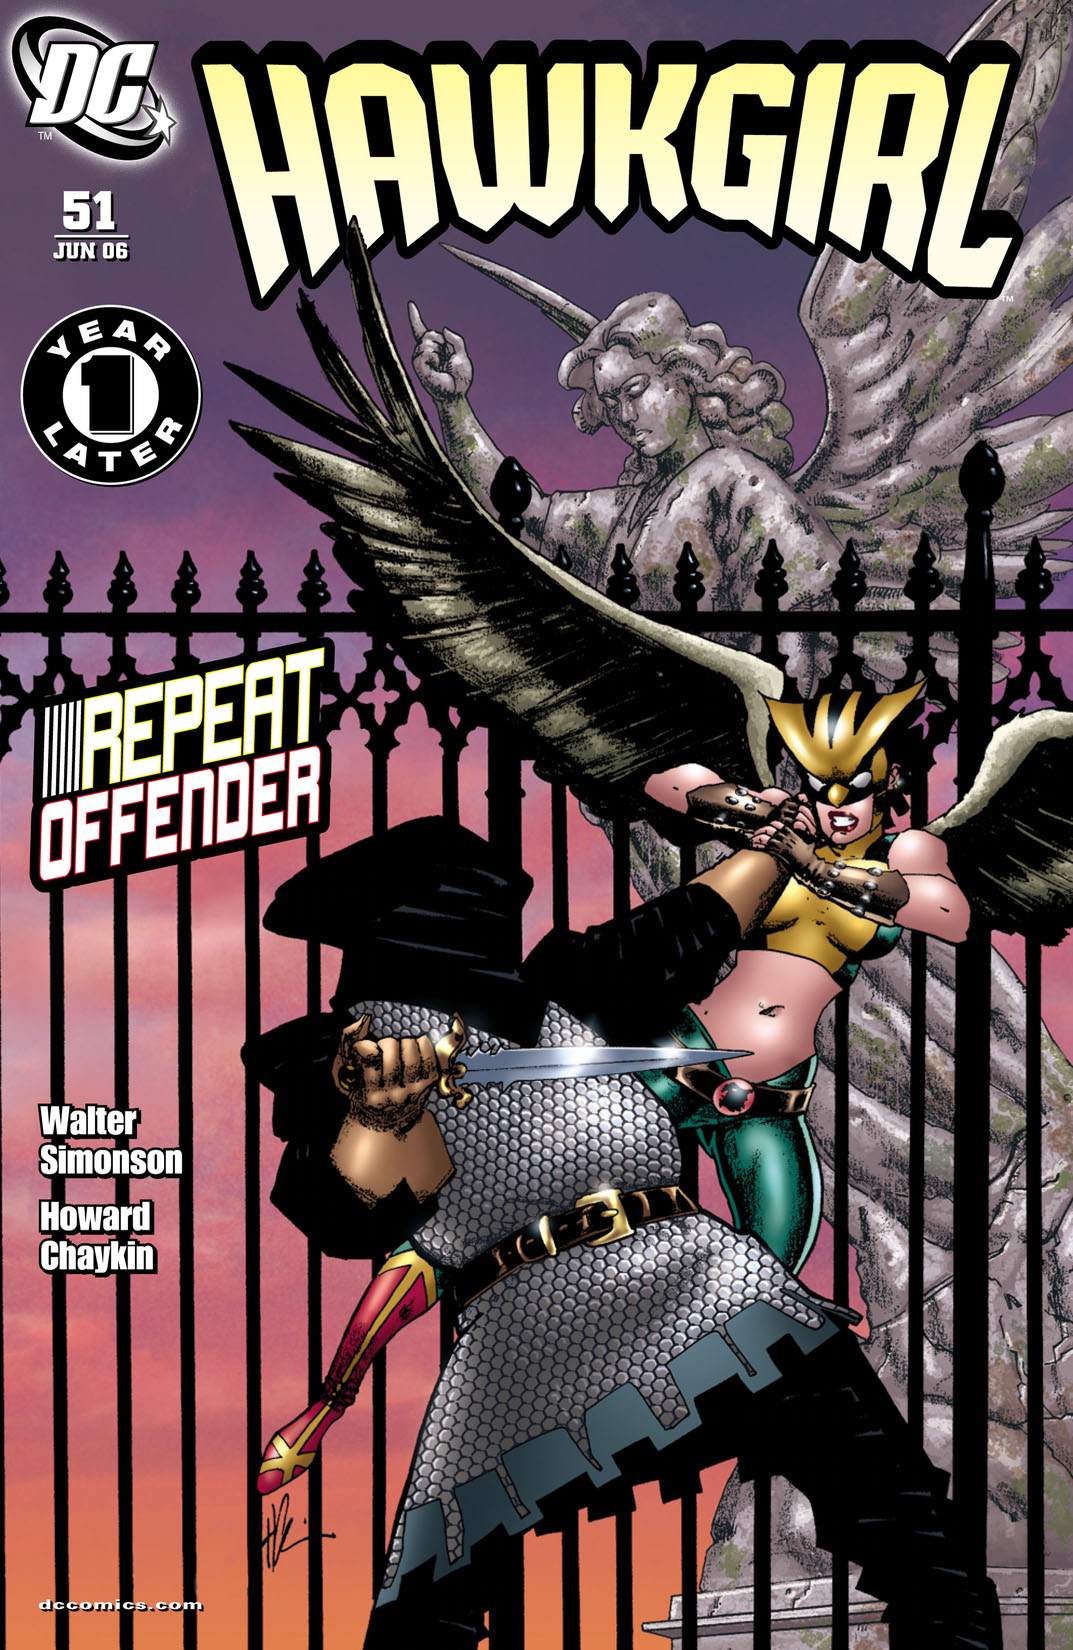 Hawkgirl #51 preview images